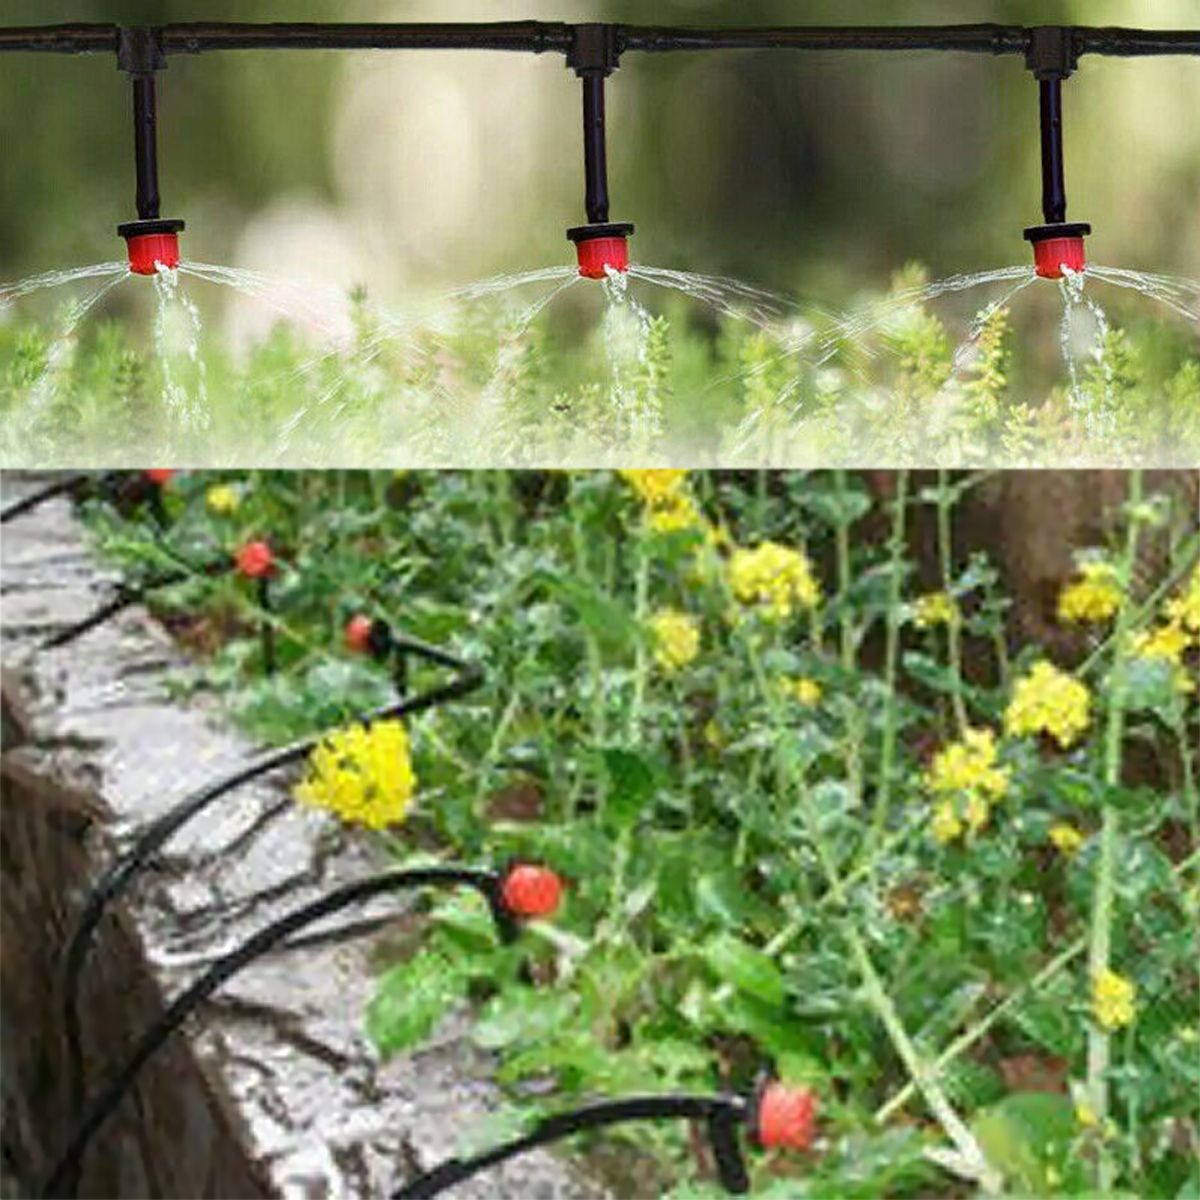 40M-DIY-Garden-Micro-Drip-Irrigation-System-Plant-Flower-Automatic-Watering-Tools-1708408